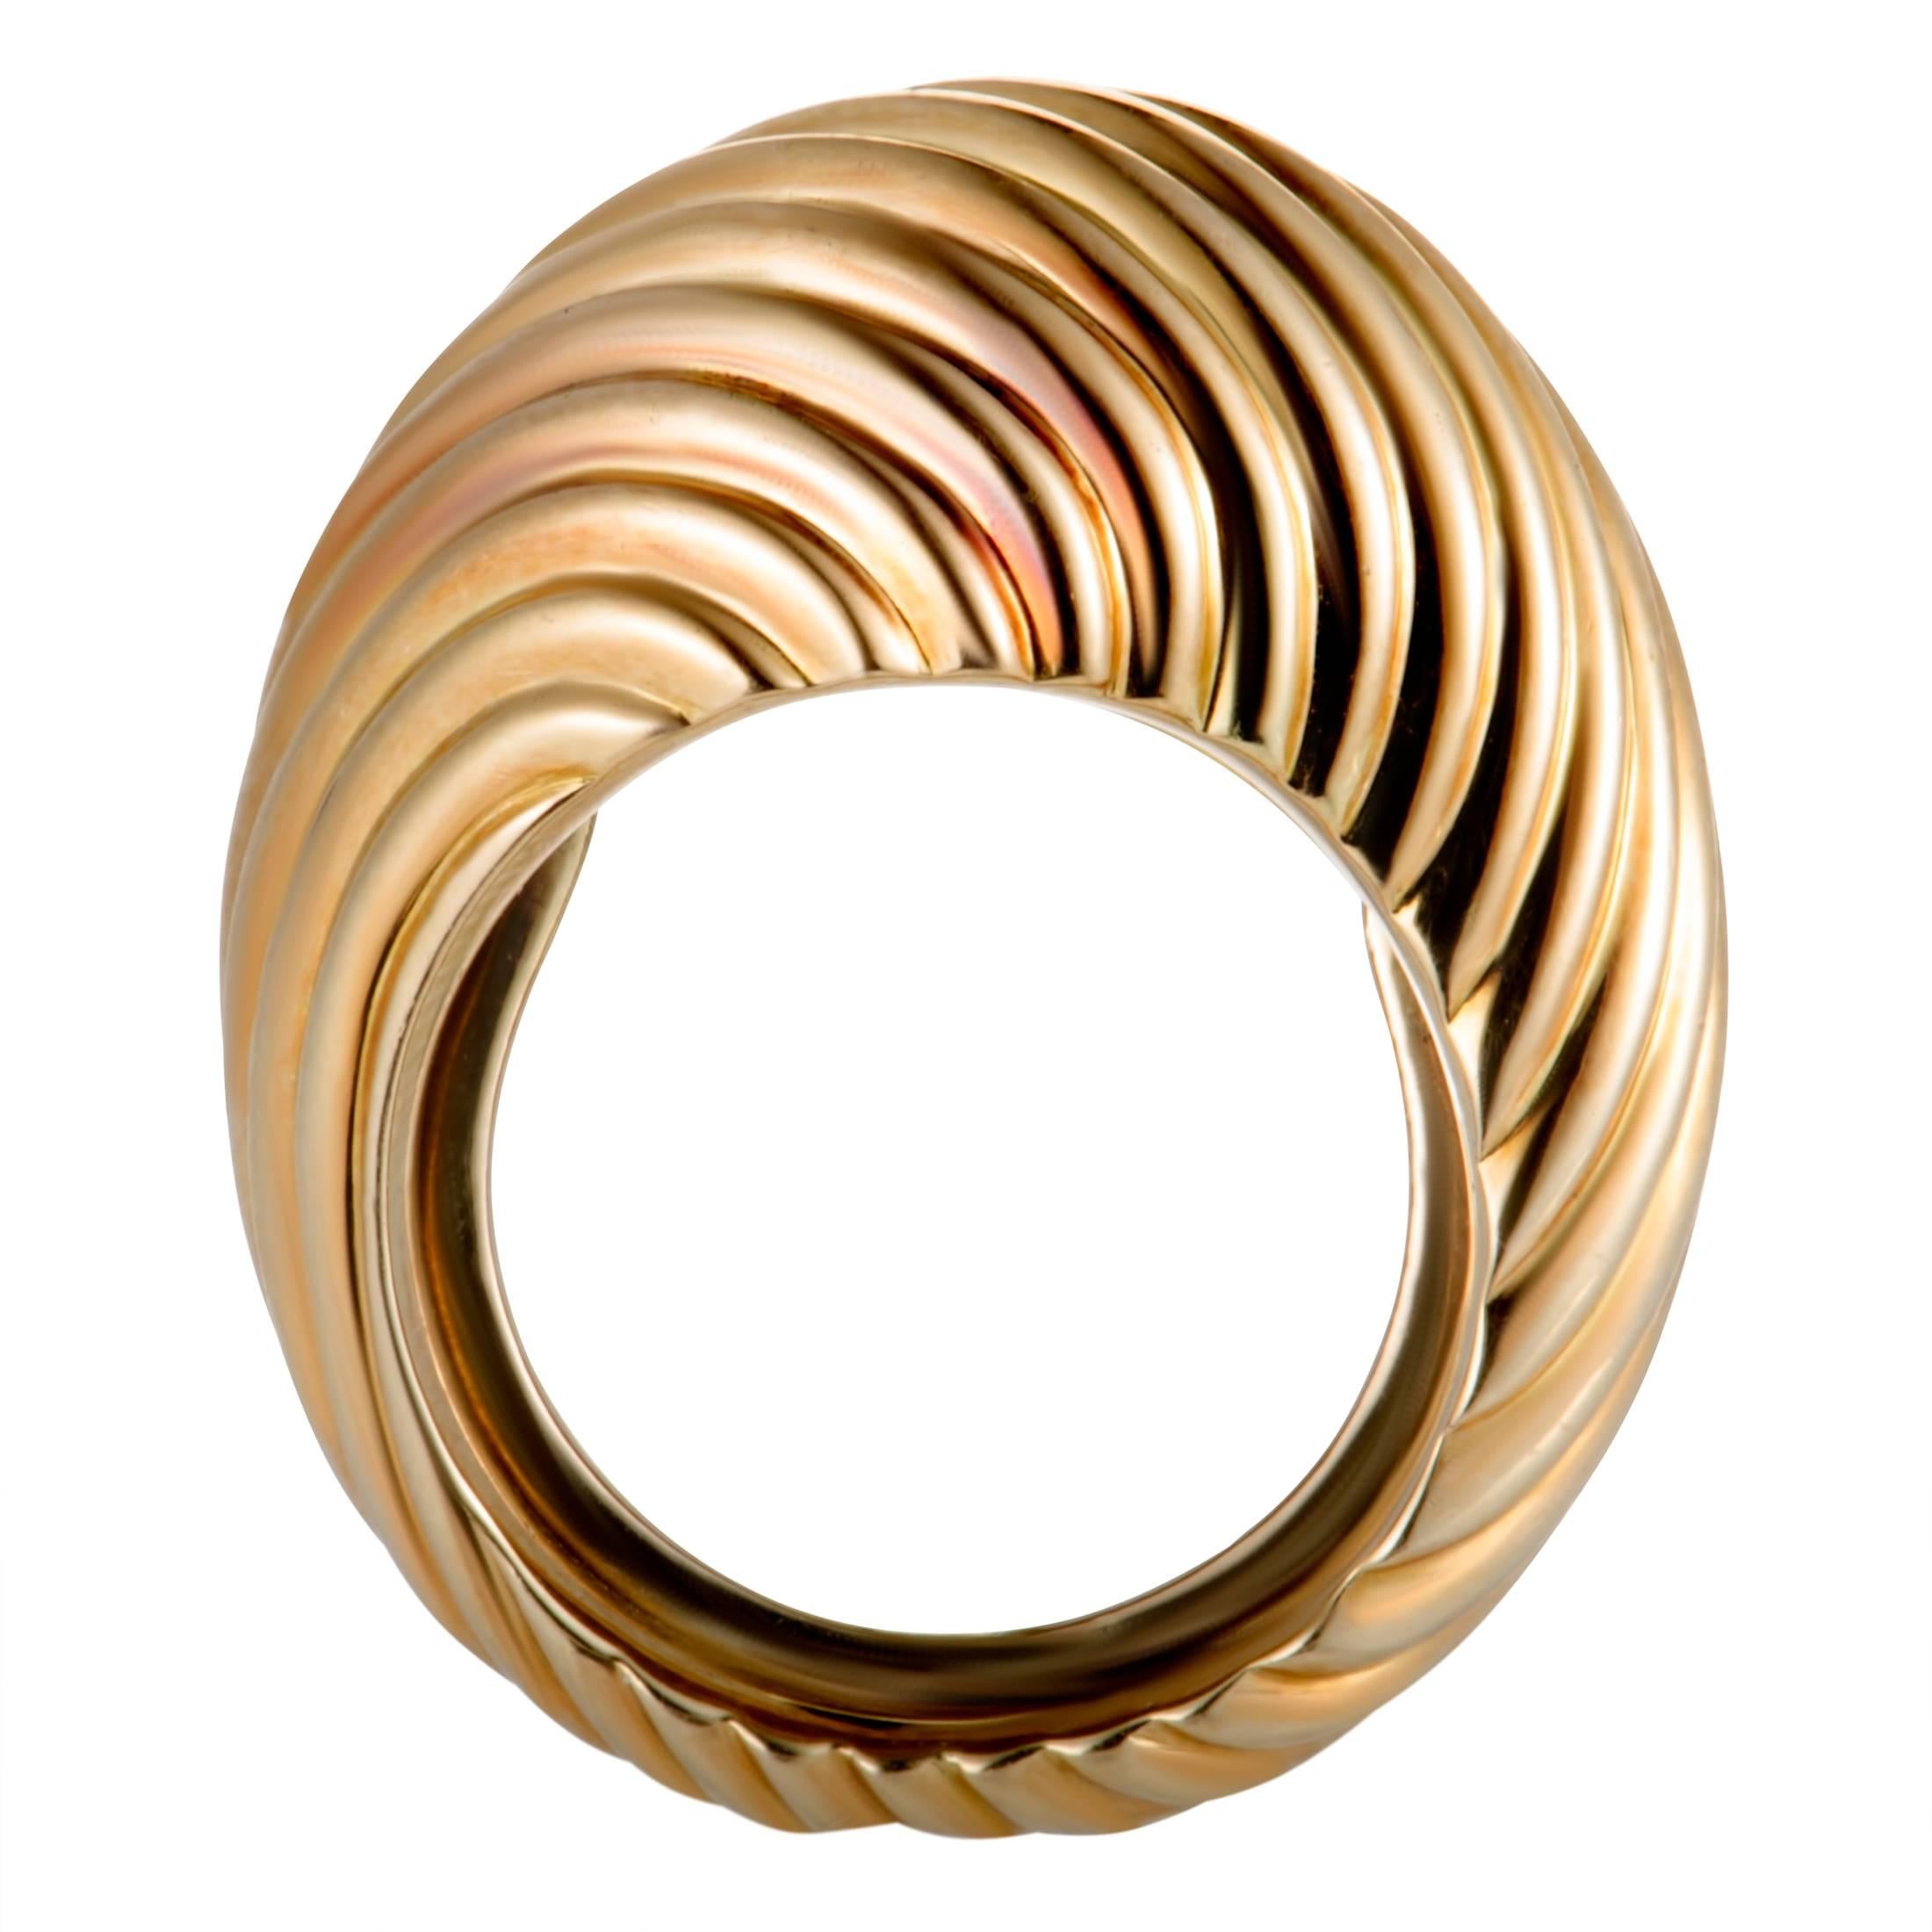 Loved for their classy designs and timeless allure, Cartier pieces are essential for luxe jewelry collections, and this ring is no exception. Made of 18K yellow gold, the ring is detailed with a compellingly graceful motif.
Included Item: